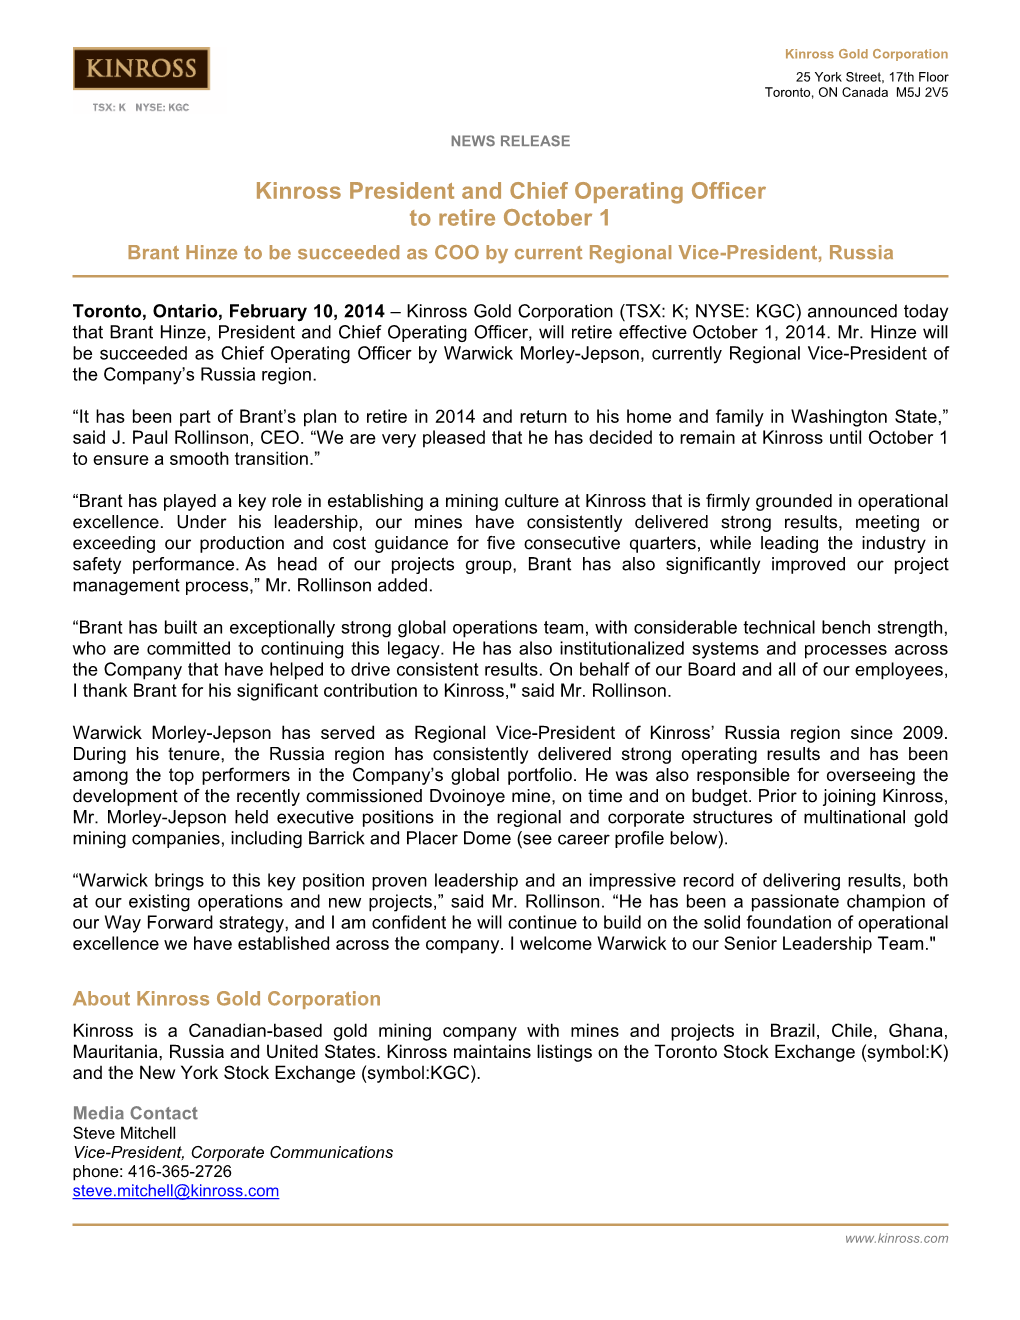 Kinross President and Chief Operating Officer to Retire October 1 Brant Hinze to Be Succeeded As COO by Current Regional Vice-President, Russia